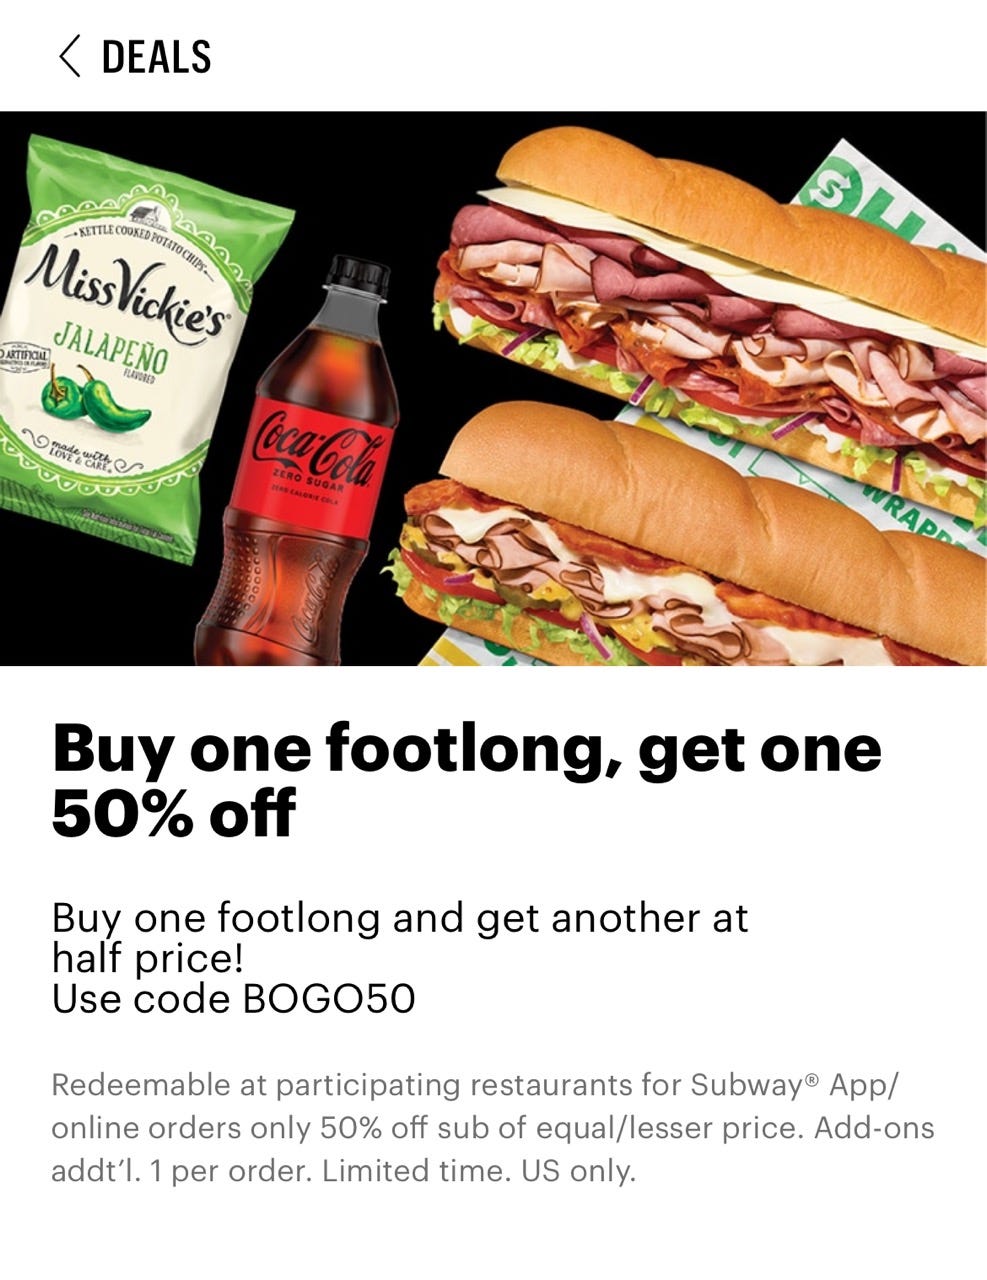 your local subway will no longer be allowed to reject digital coupons or avoid the $5 footlong deal